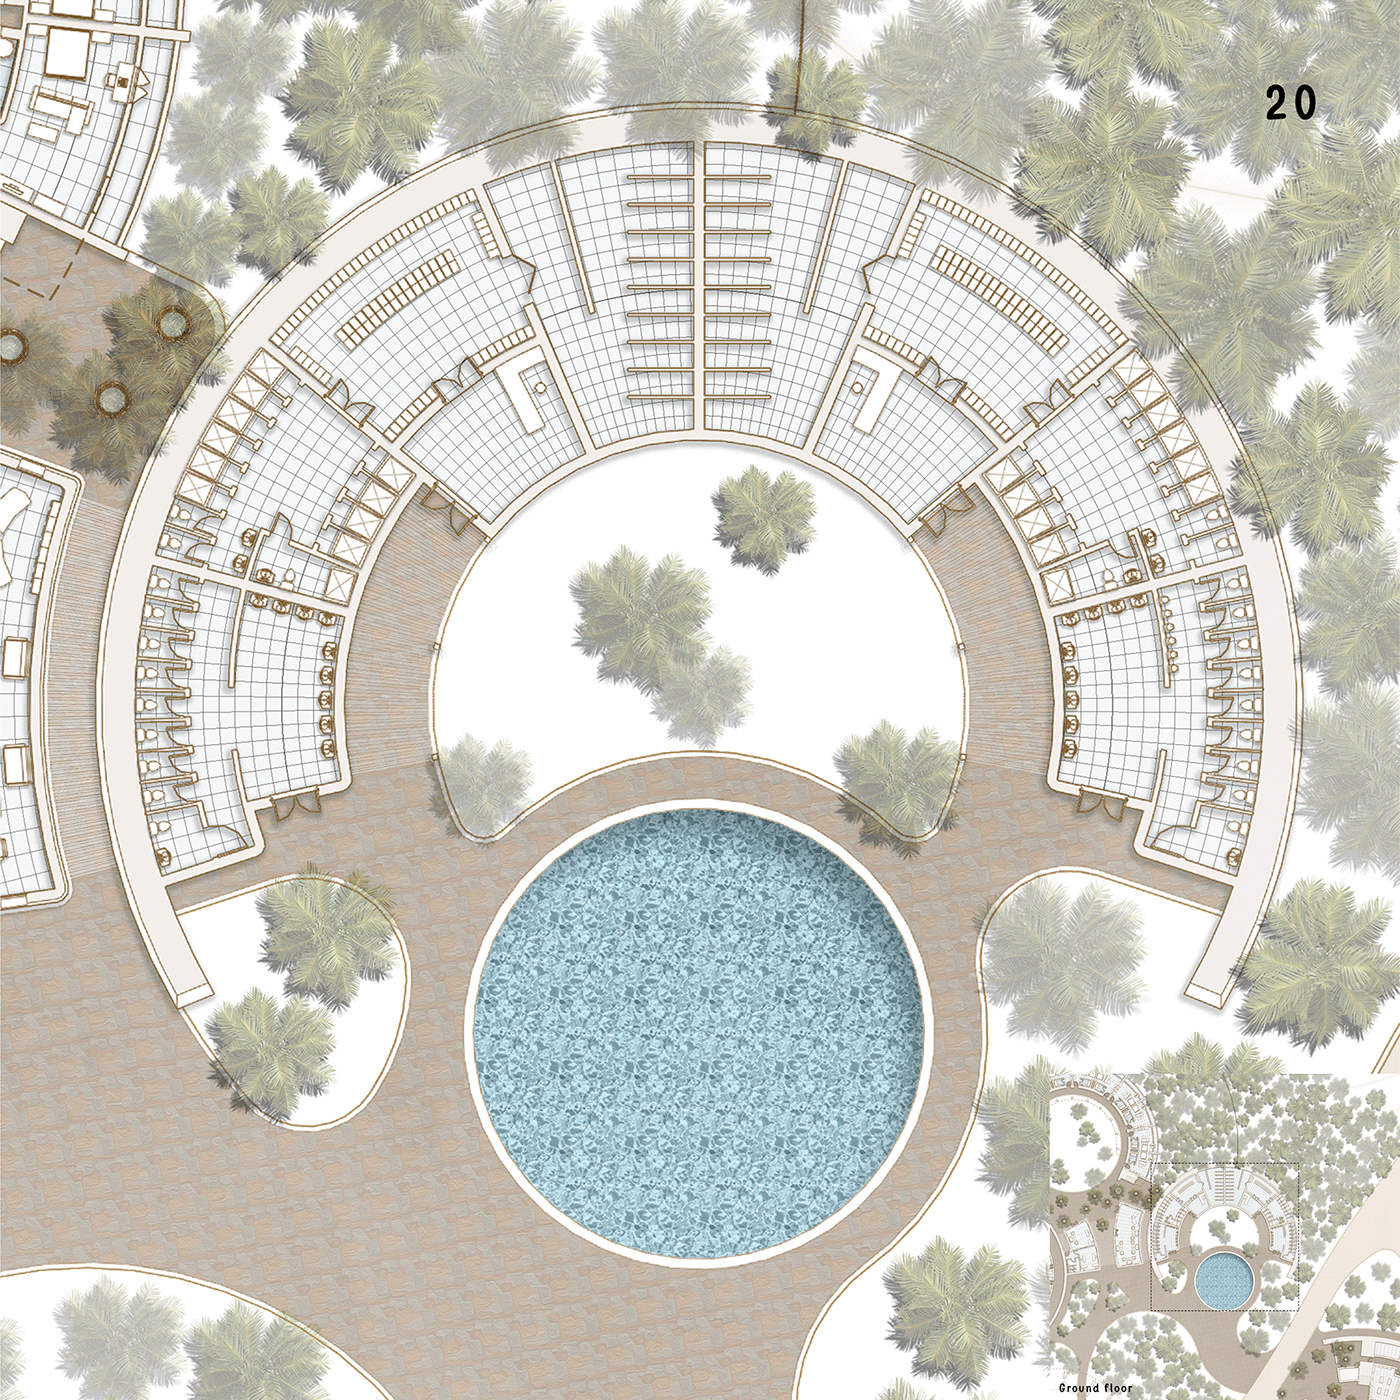 graduation project Siwa Oasis resort Entertainment architecture Biophilic Design Recreational concept Day-use